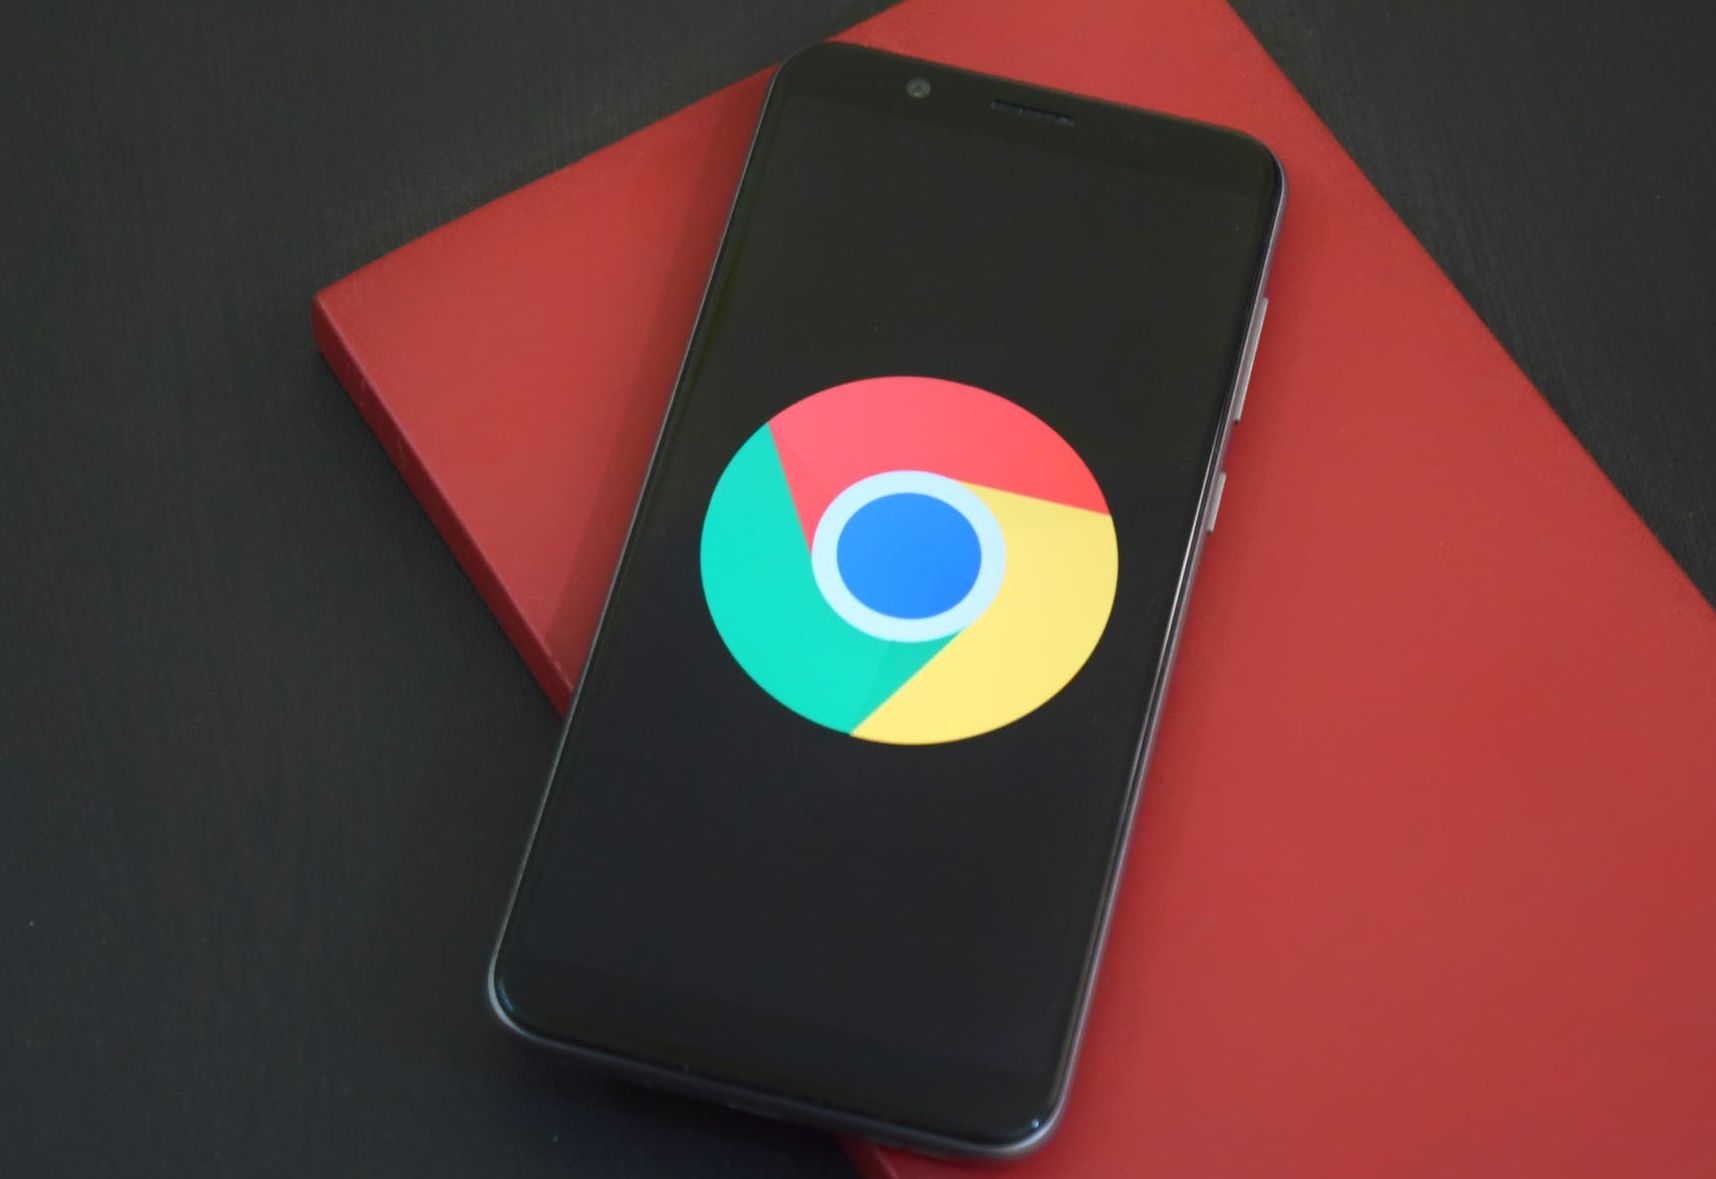 The Google Chrome icon on a black phone resting on a red surface